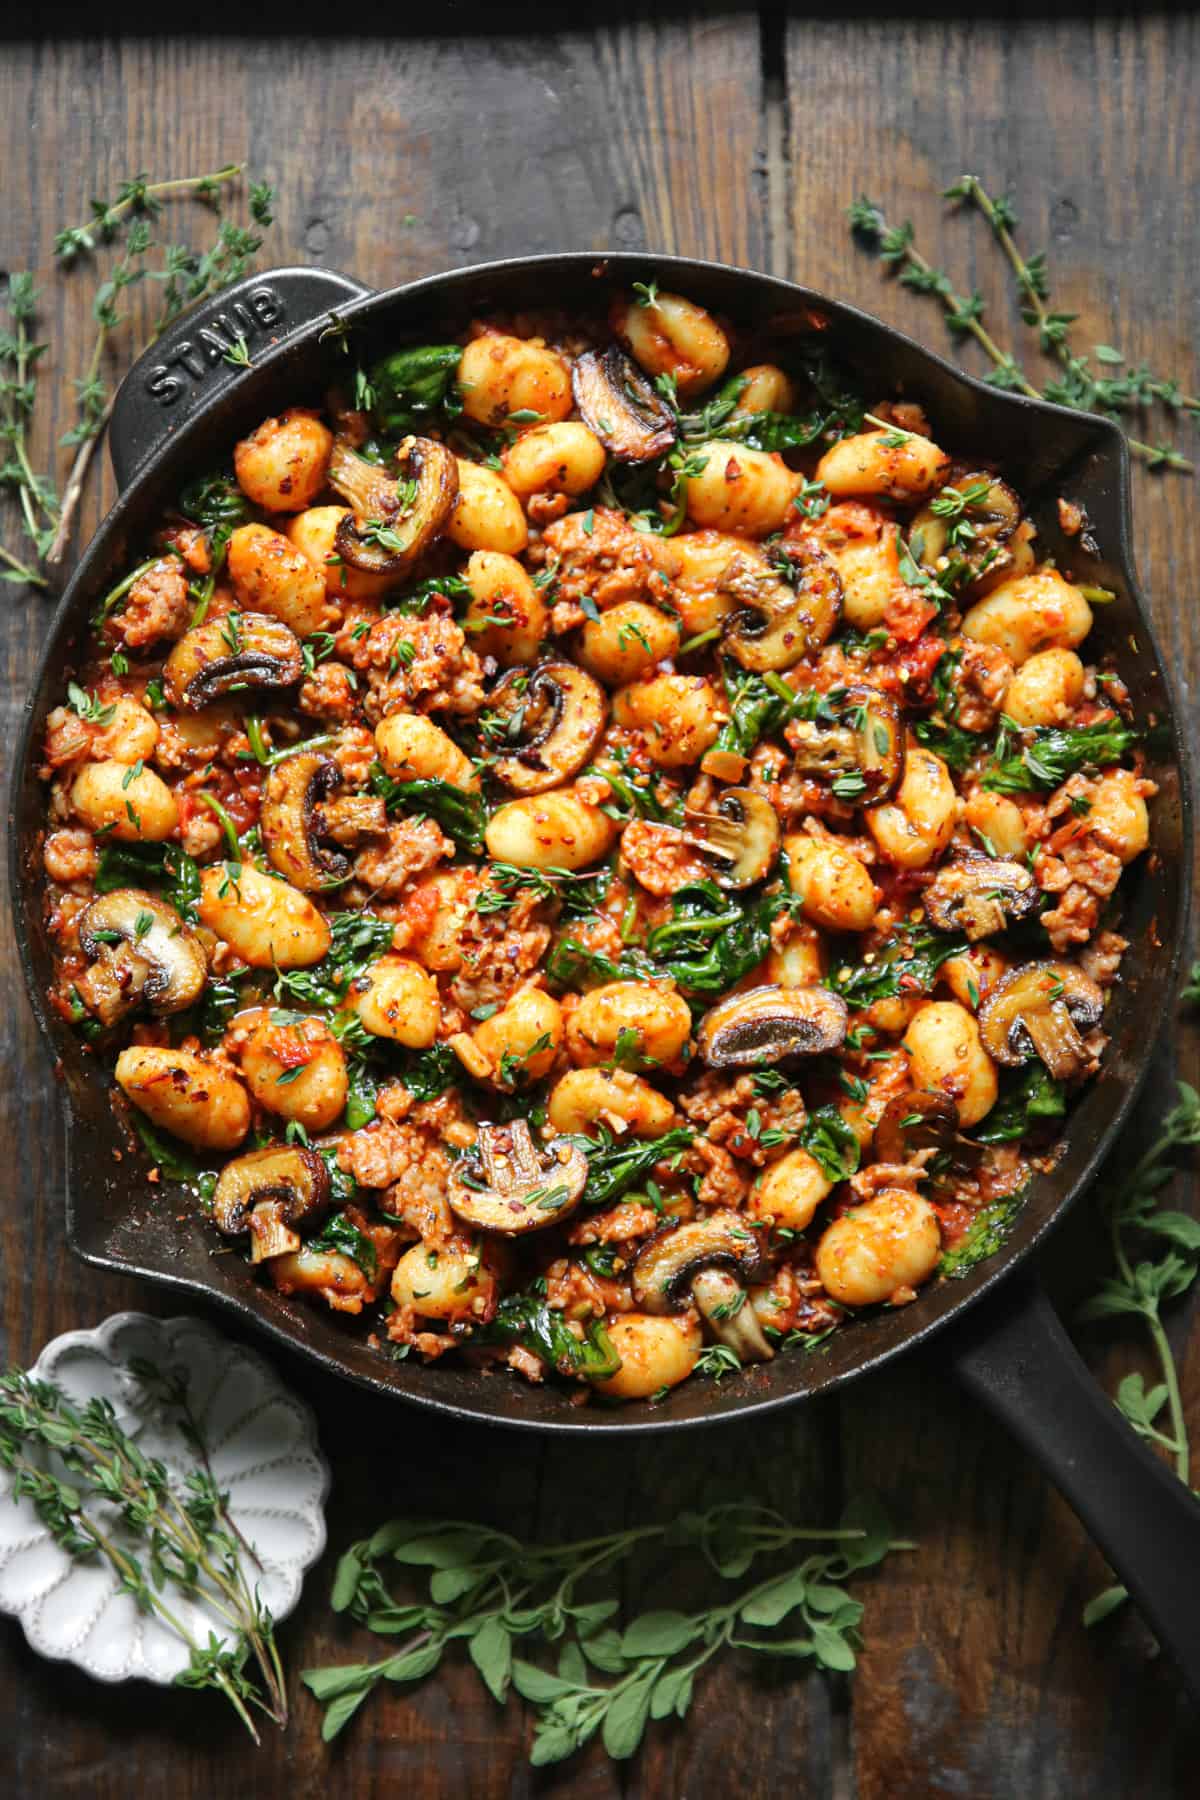 gnocchi with tomato sauce, sausage, spinach, and mushrooms in a cast iron skillet.